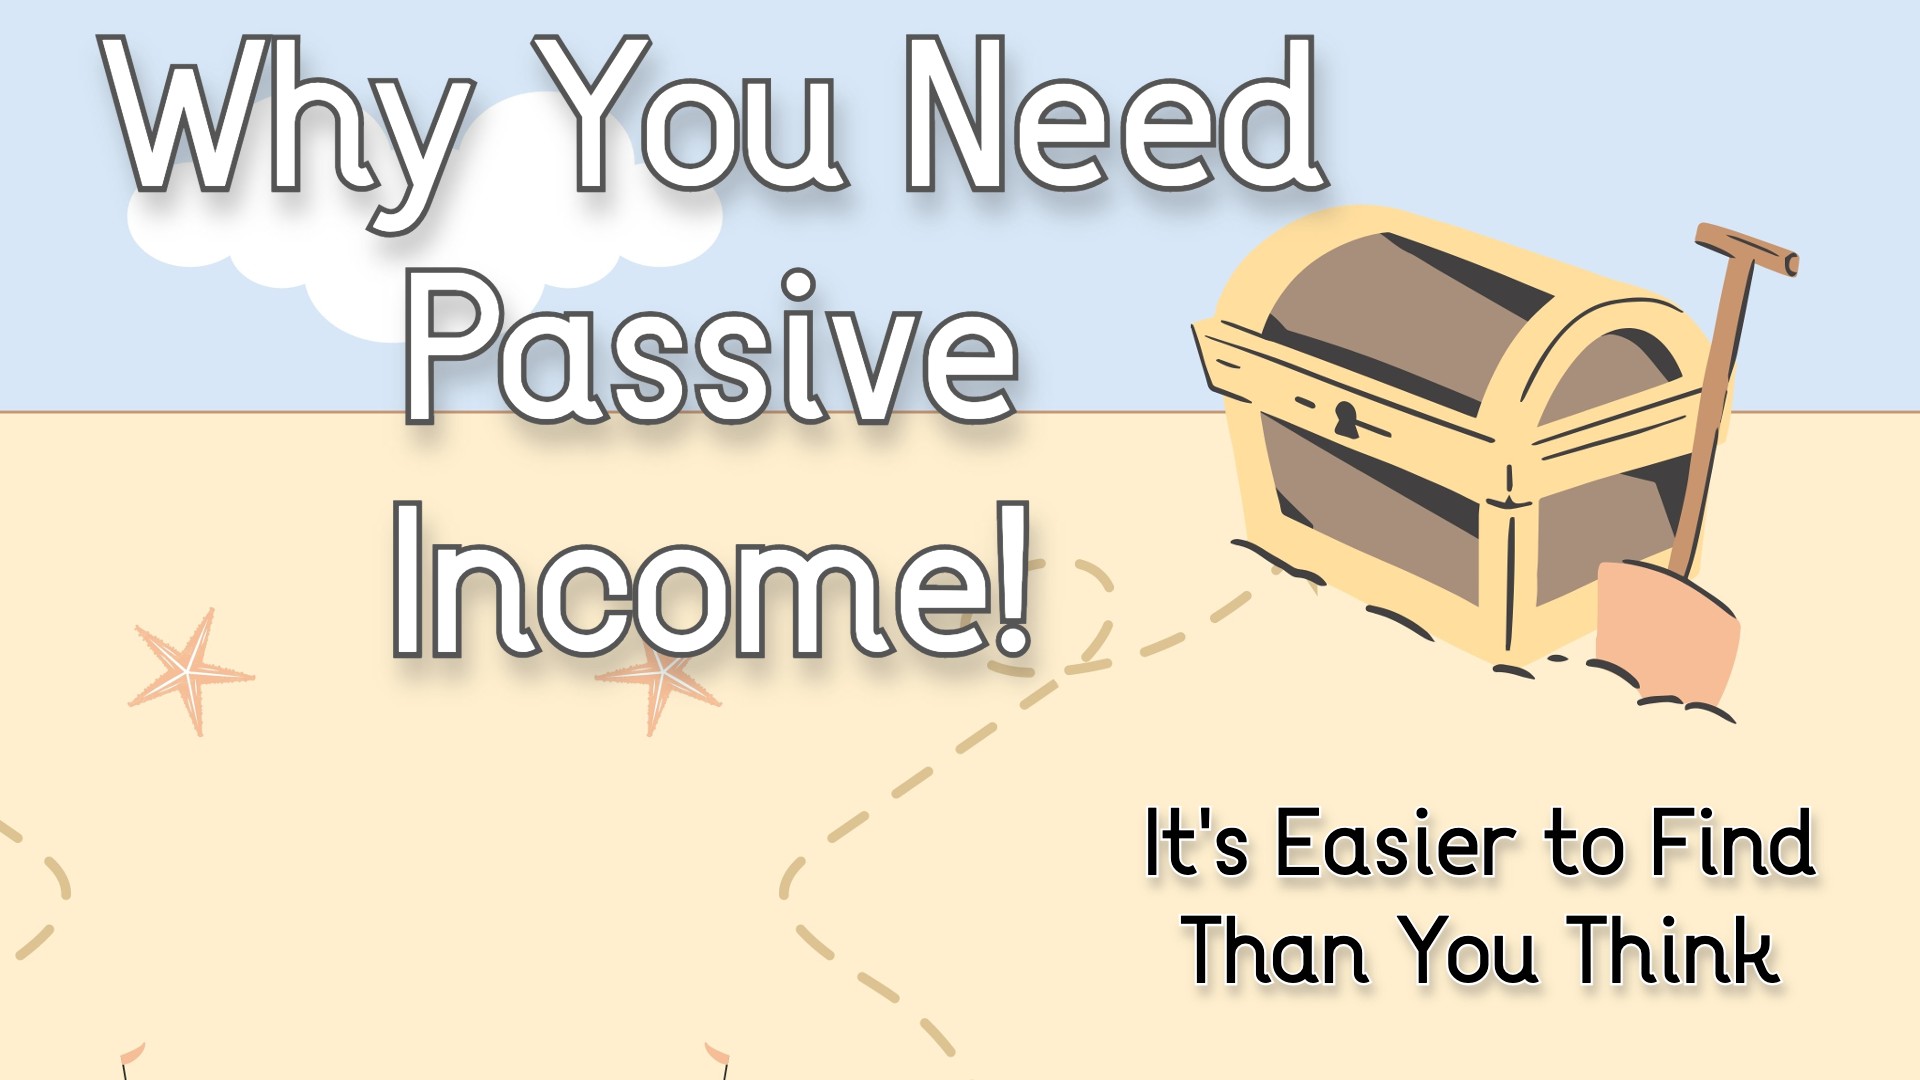 Why You Need Passive Income